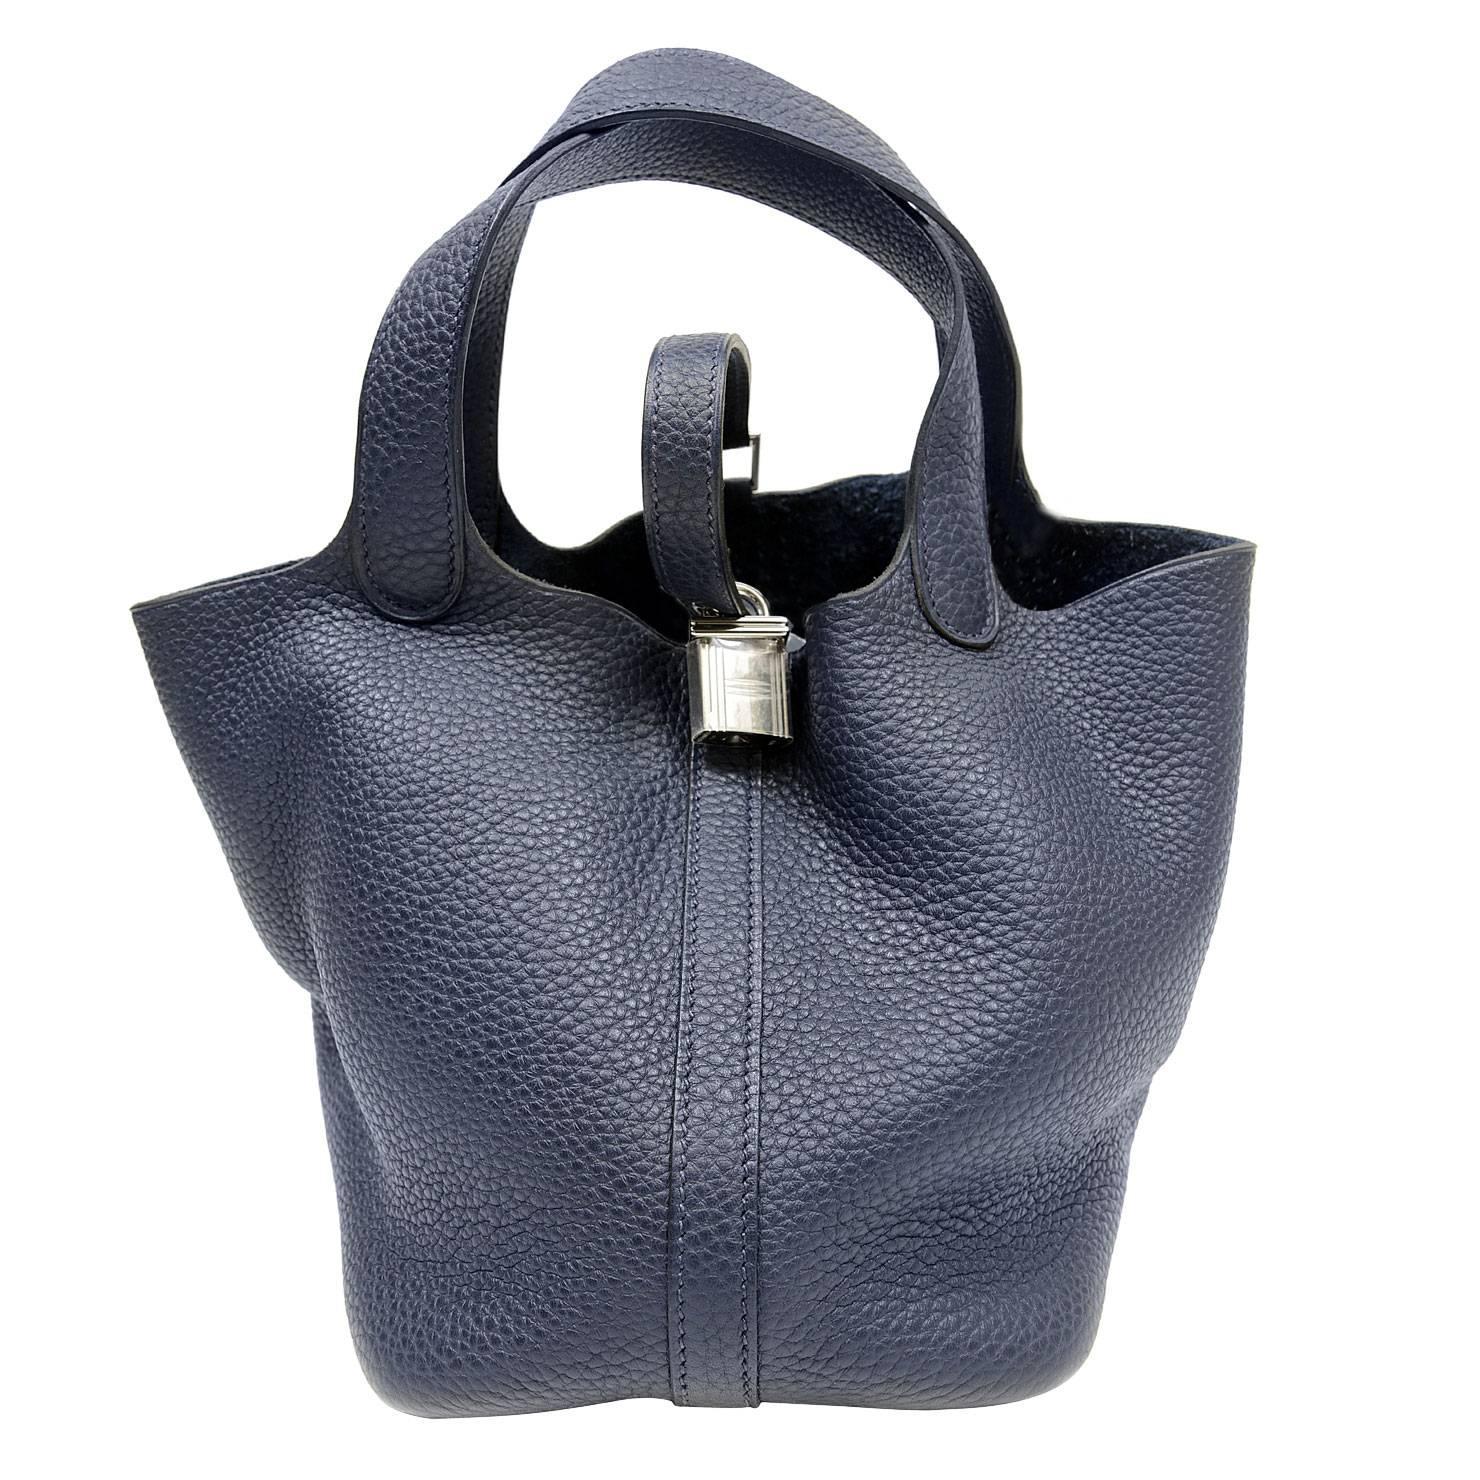 Hermes Indigo Clemence Leather Picotin Lock PM Bag For Sale at 1stdibs  